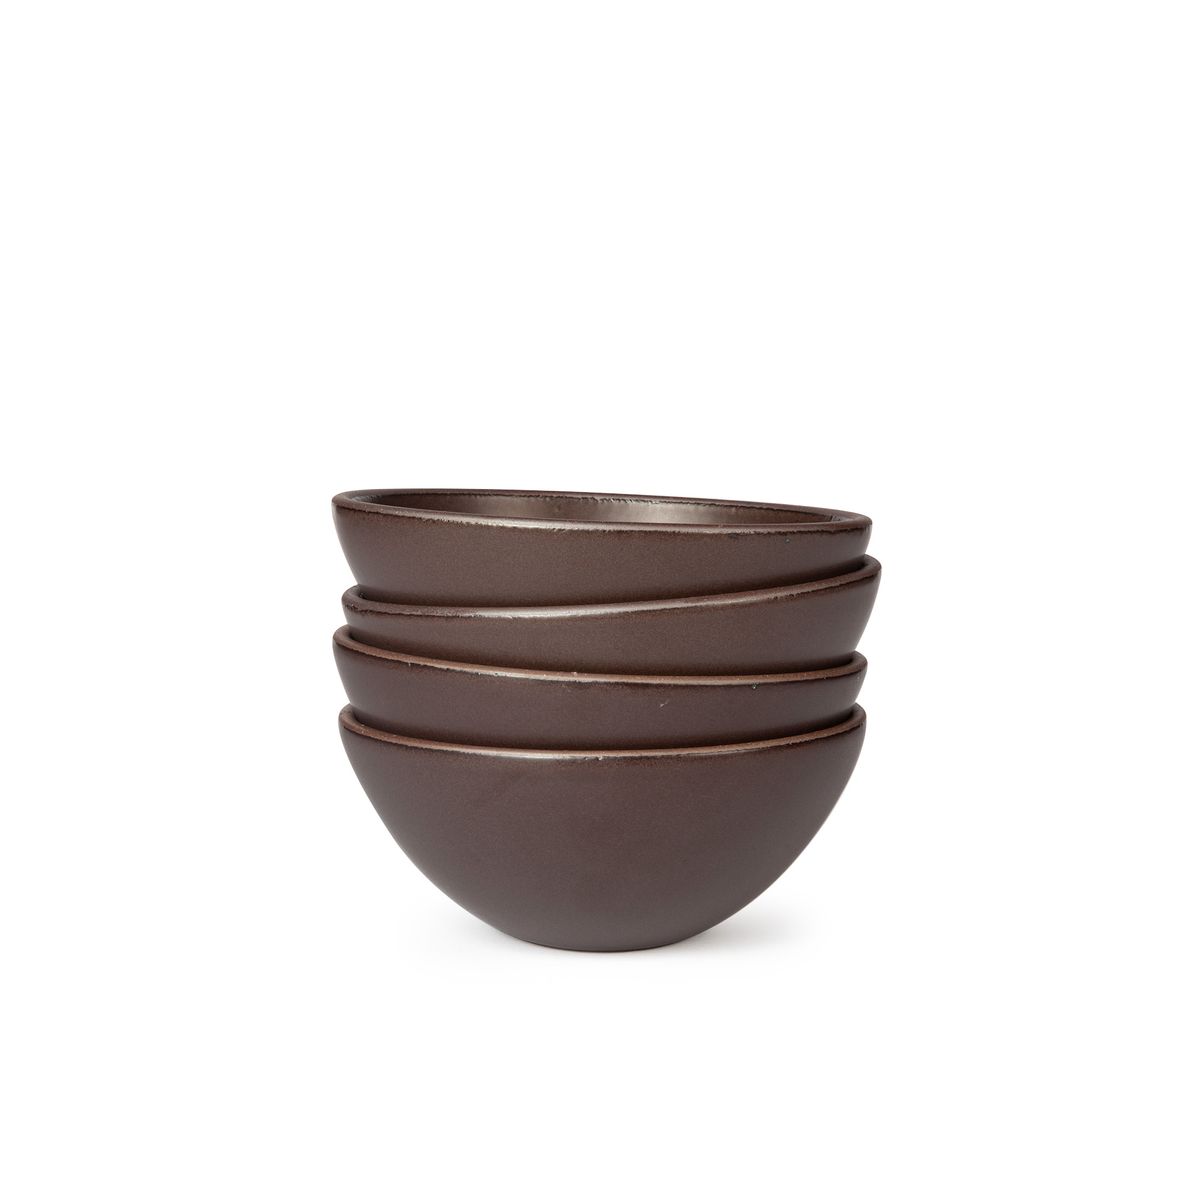 A stack of 4 medium rounded ceramic bowls in a dark cool brown color featuring iron speckles and an unglazed rim